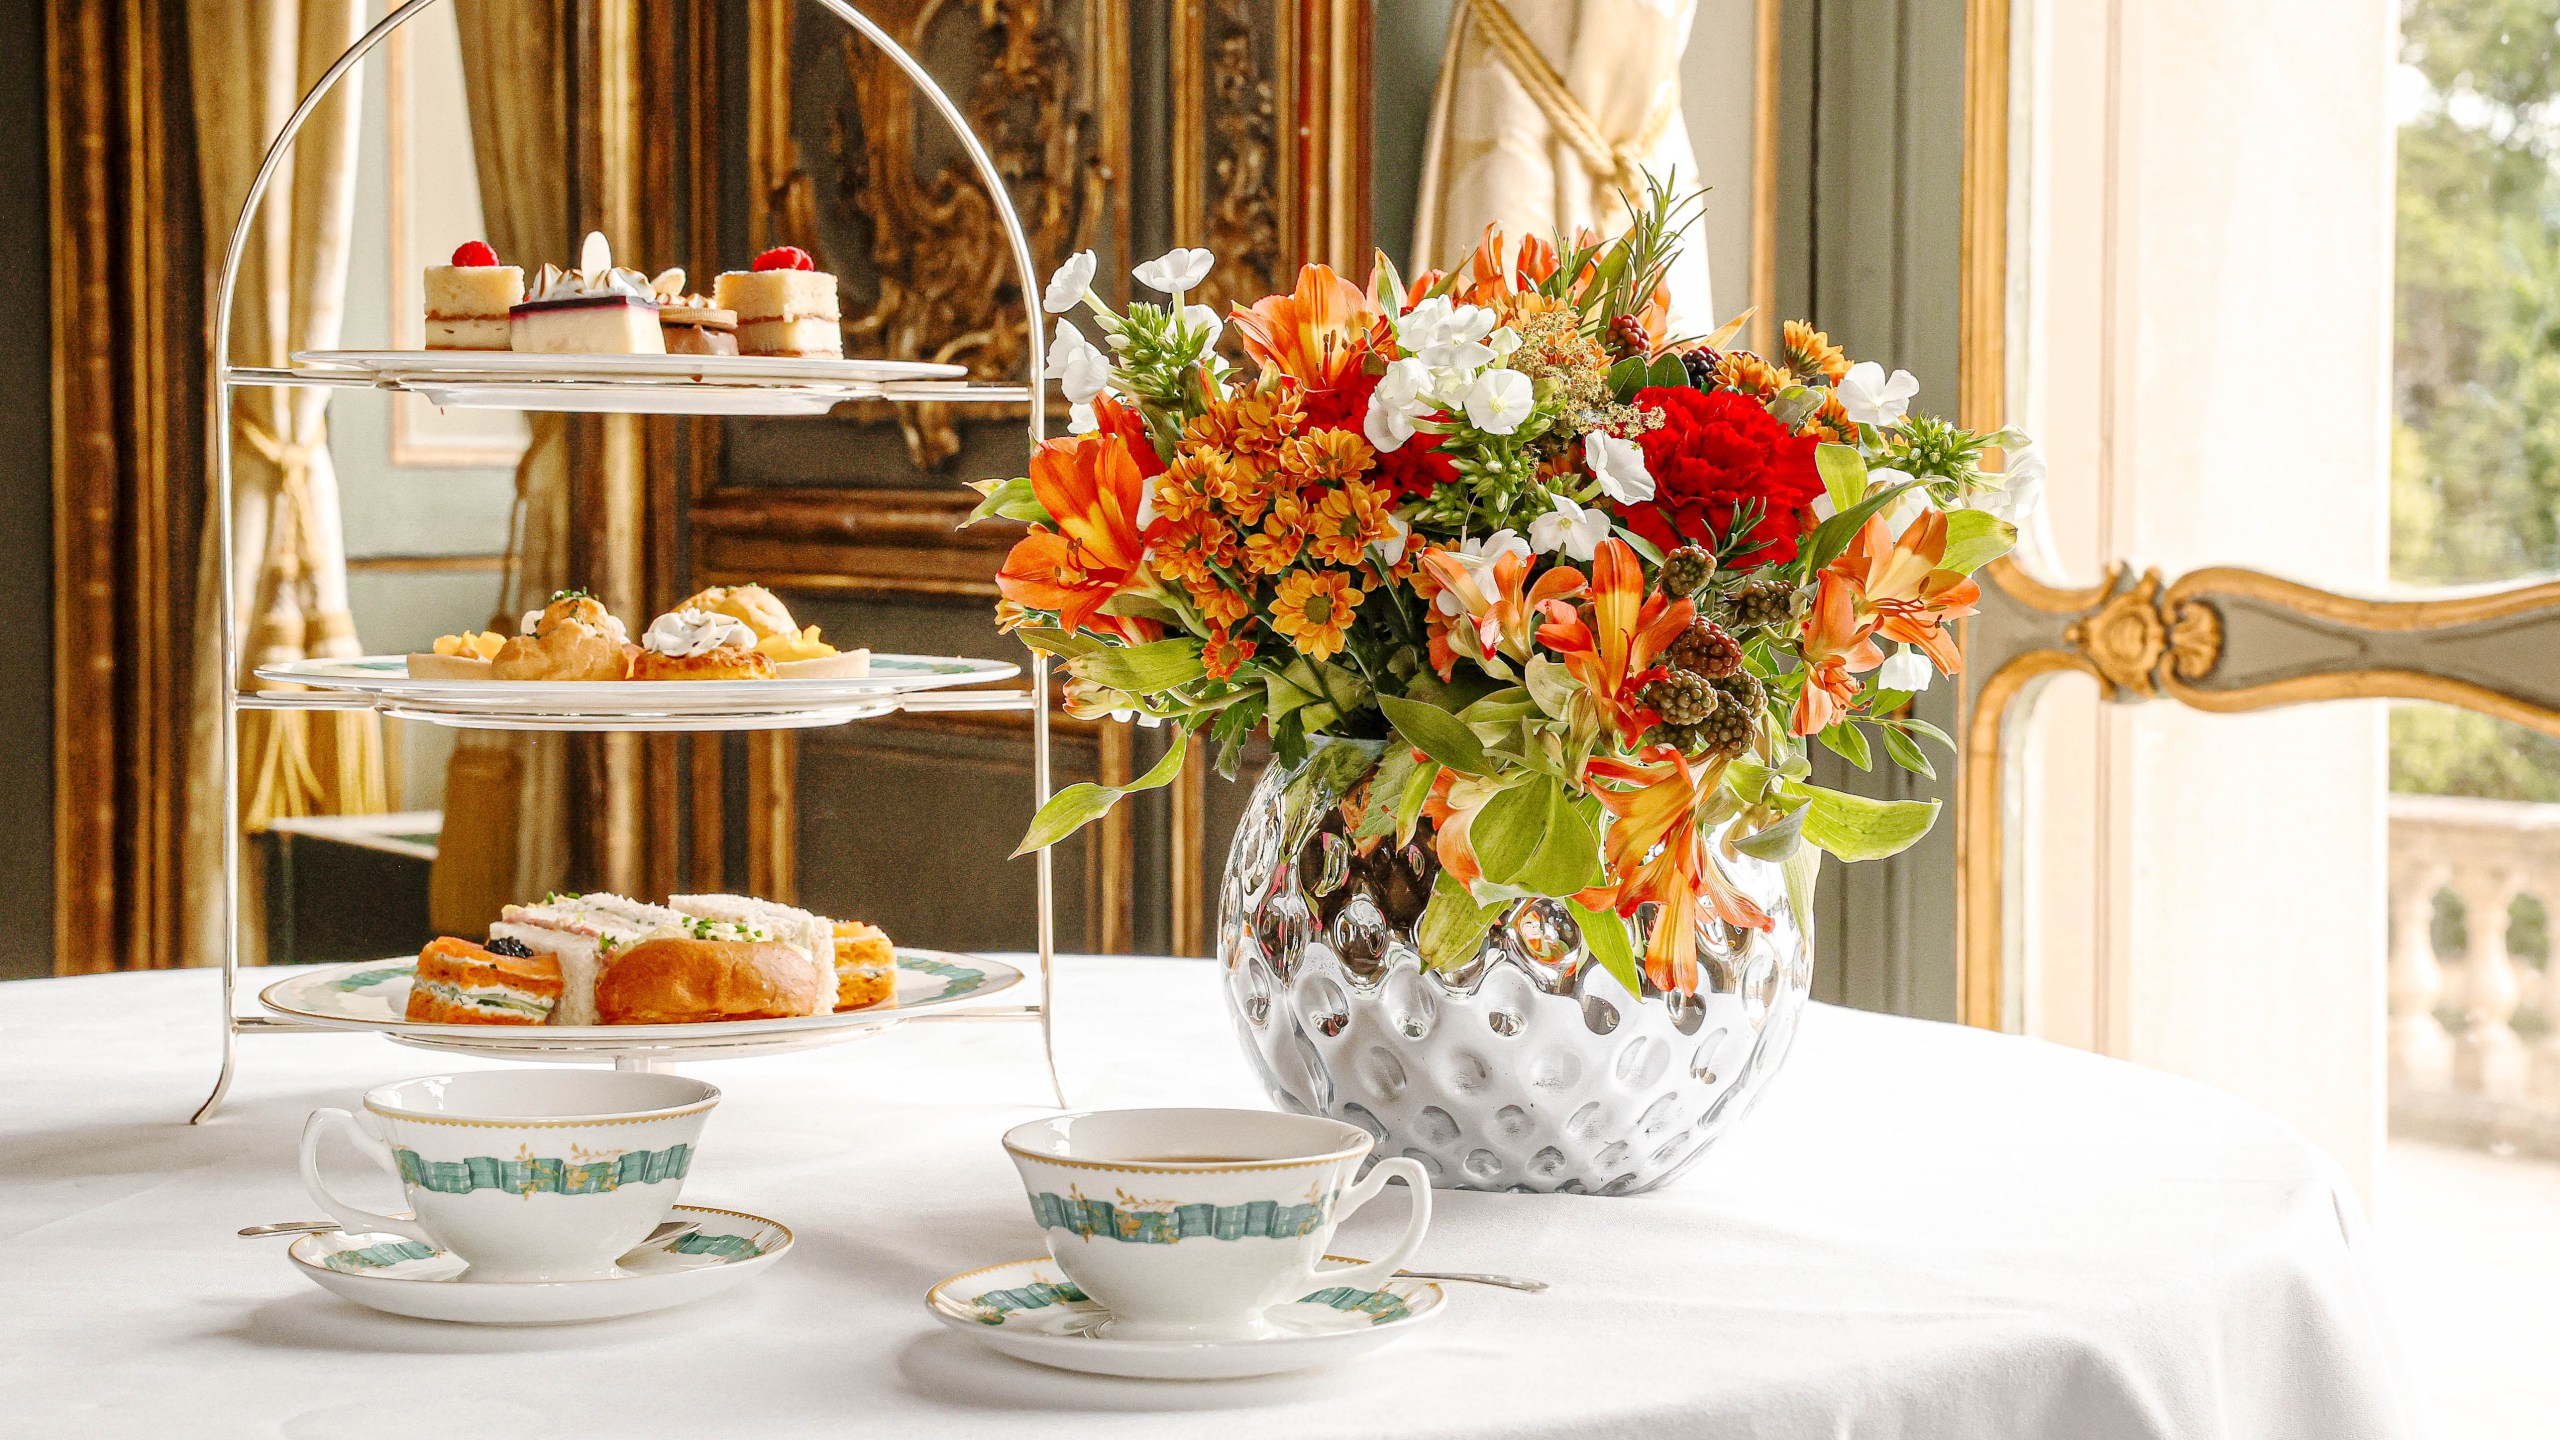 Afternoon tea at Cliveden House